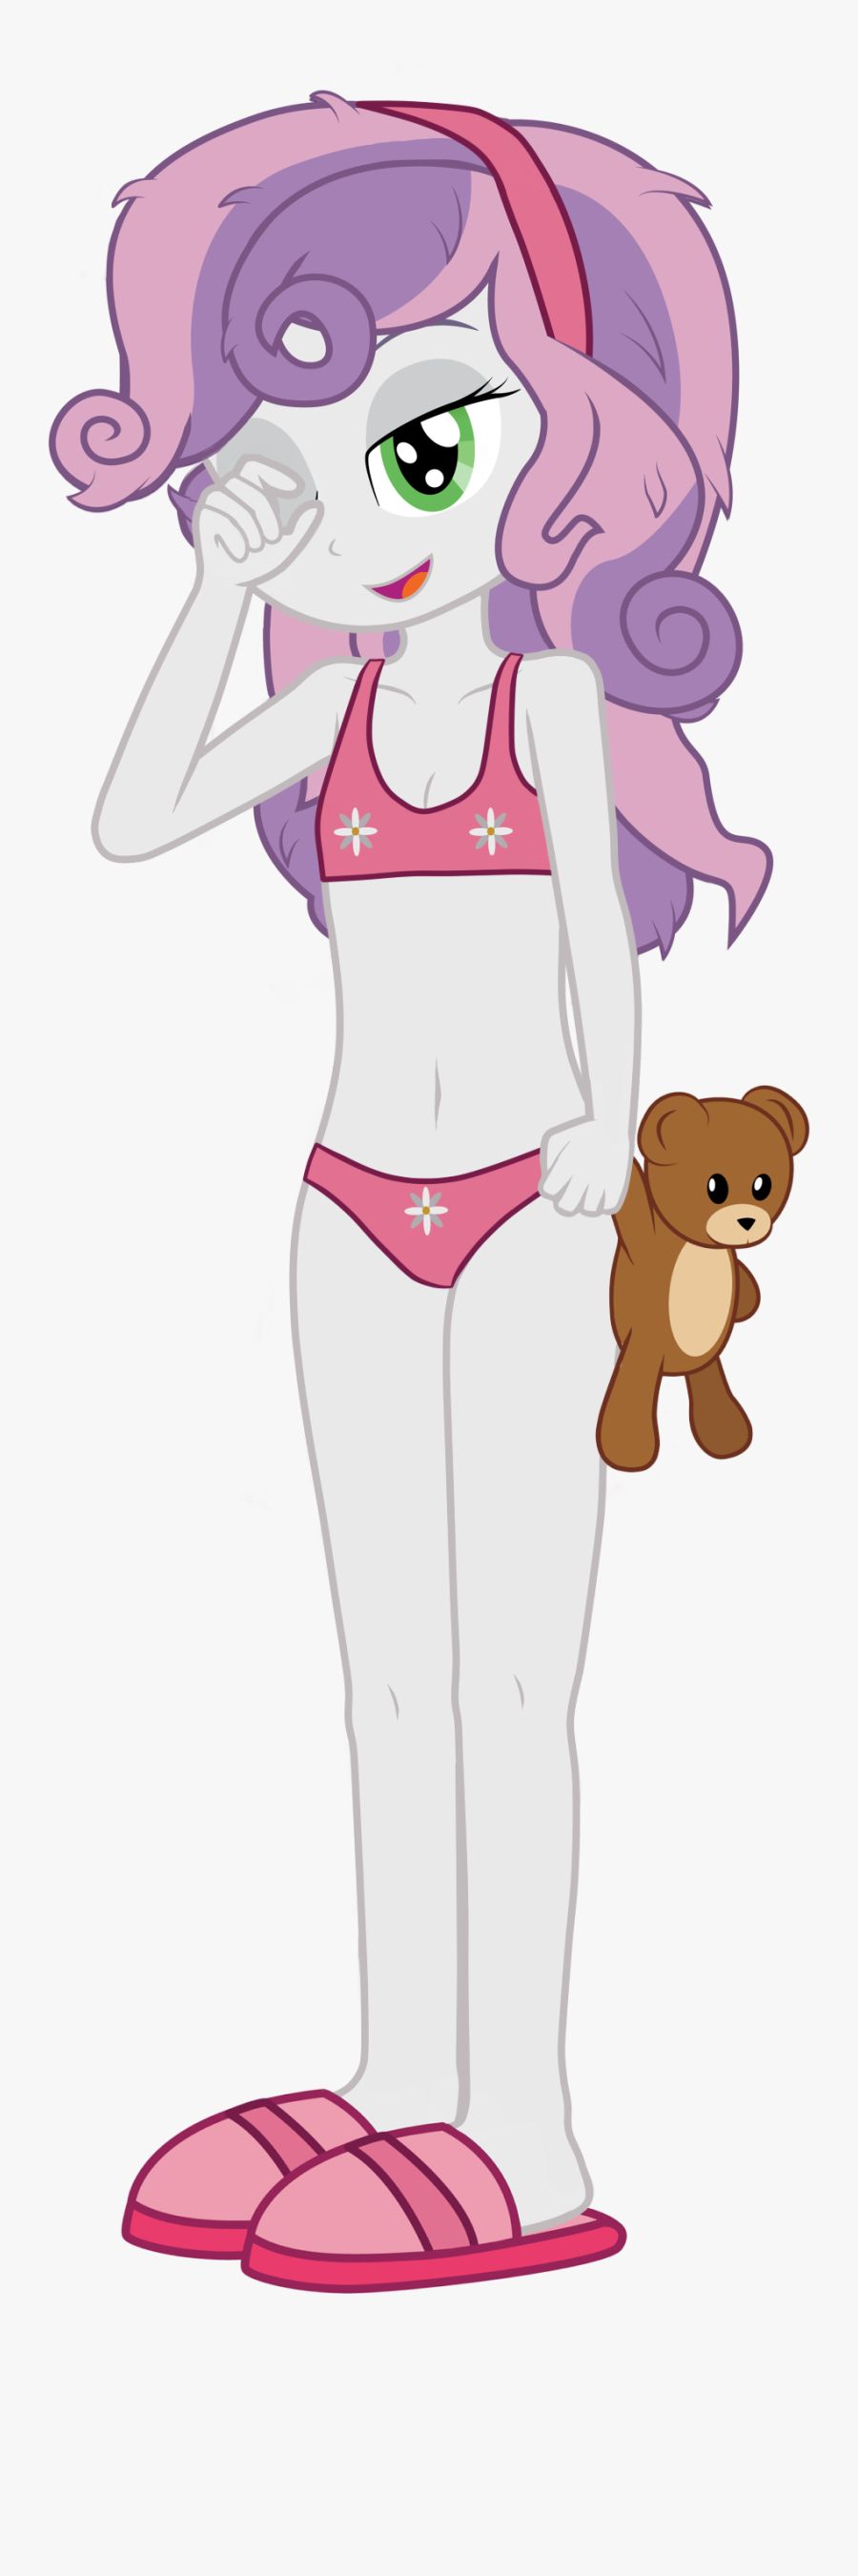 Image Freeuse Stock Underwear Vector Female - Equestria Girls My Little Pony Rarity 👙, Transparent Clipart